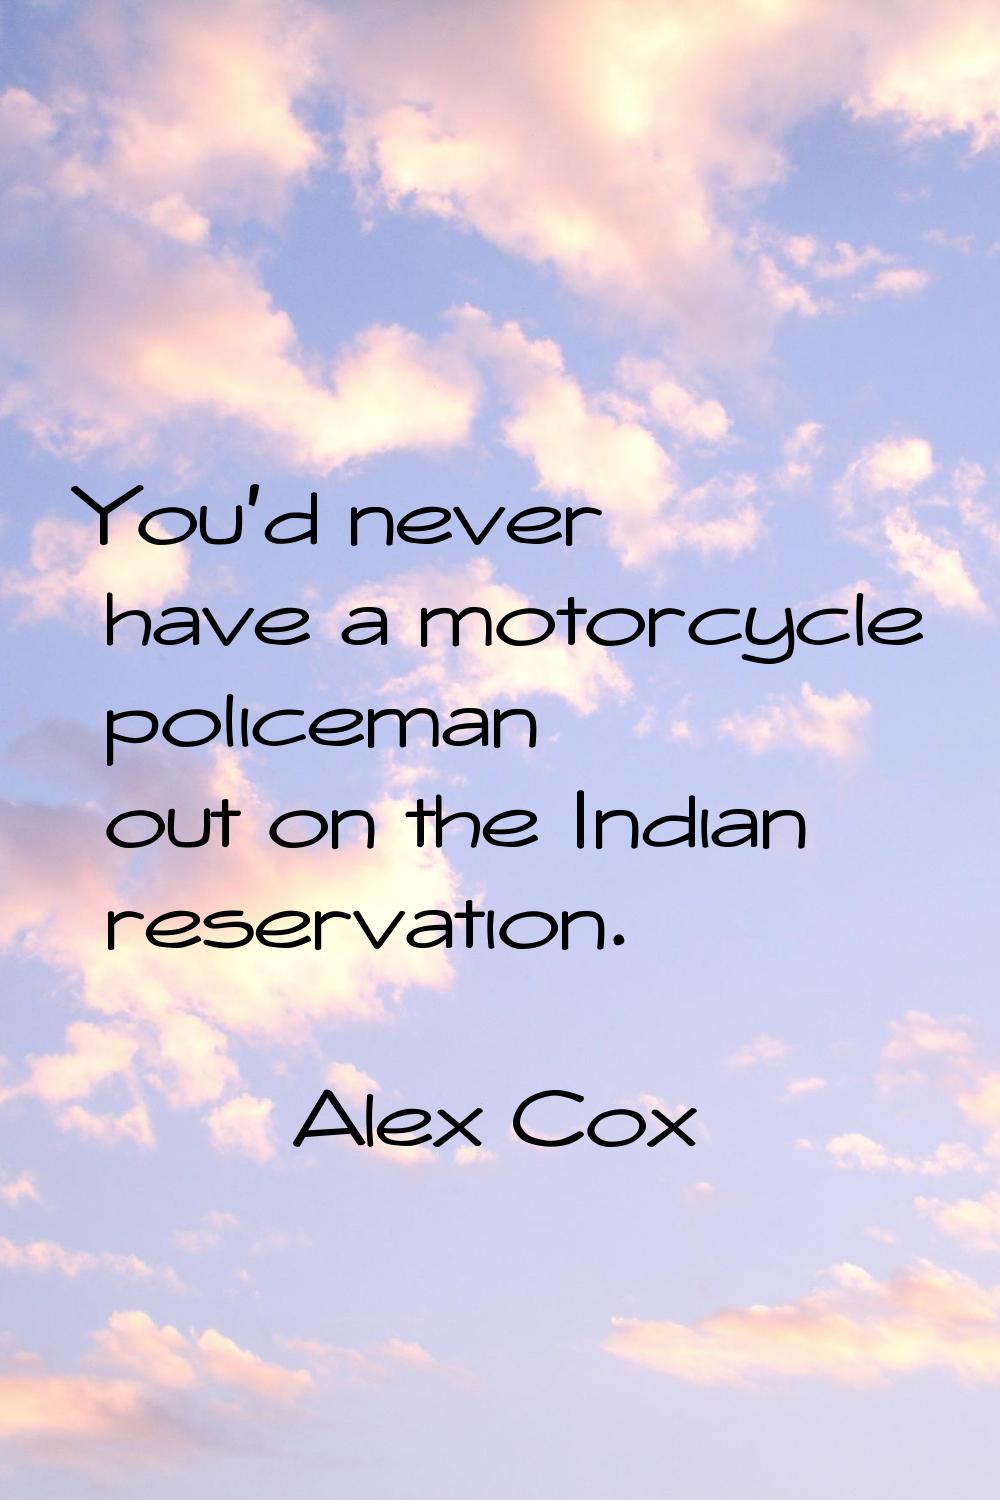 You'd never have a motorcycle policeman out on the Indian reservation.